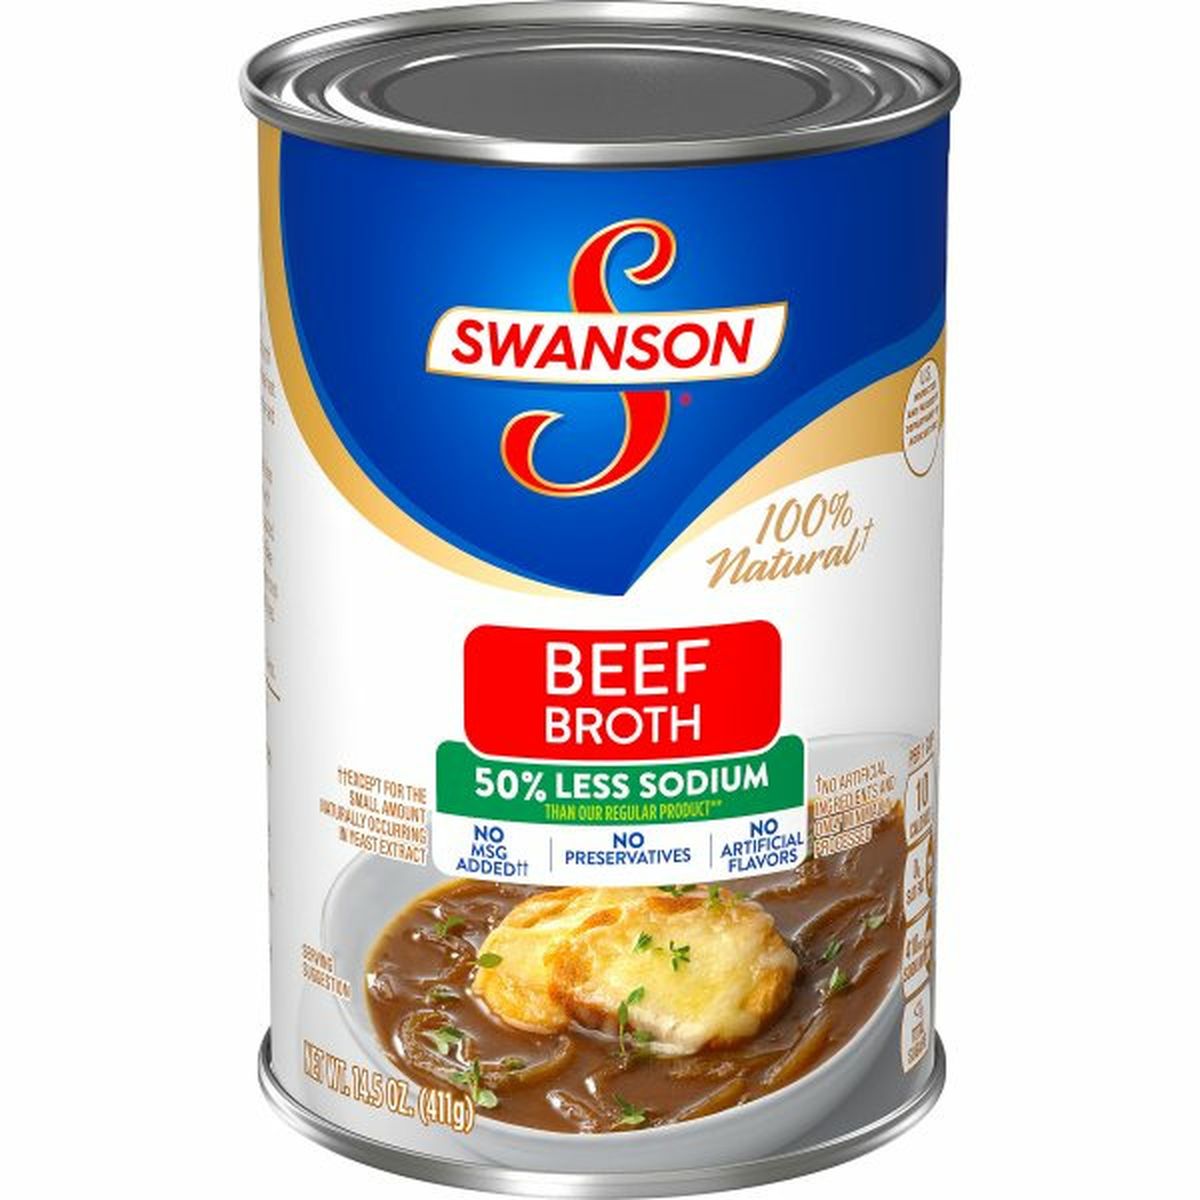 Calories in Swansons 50% Less Sodium Beef Broth